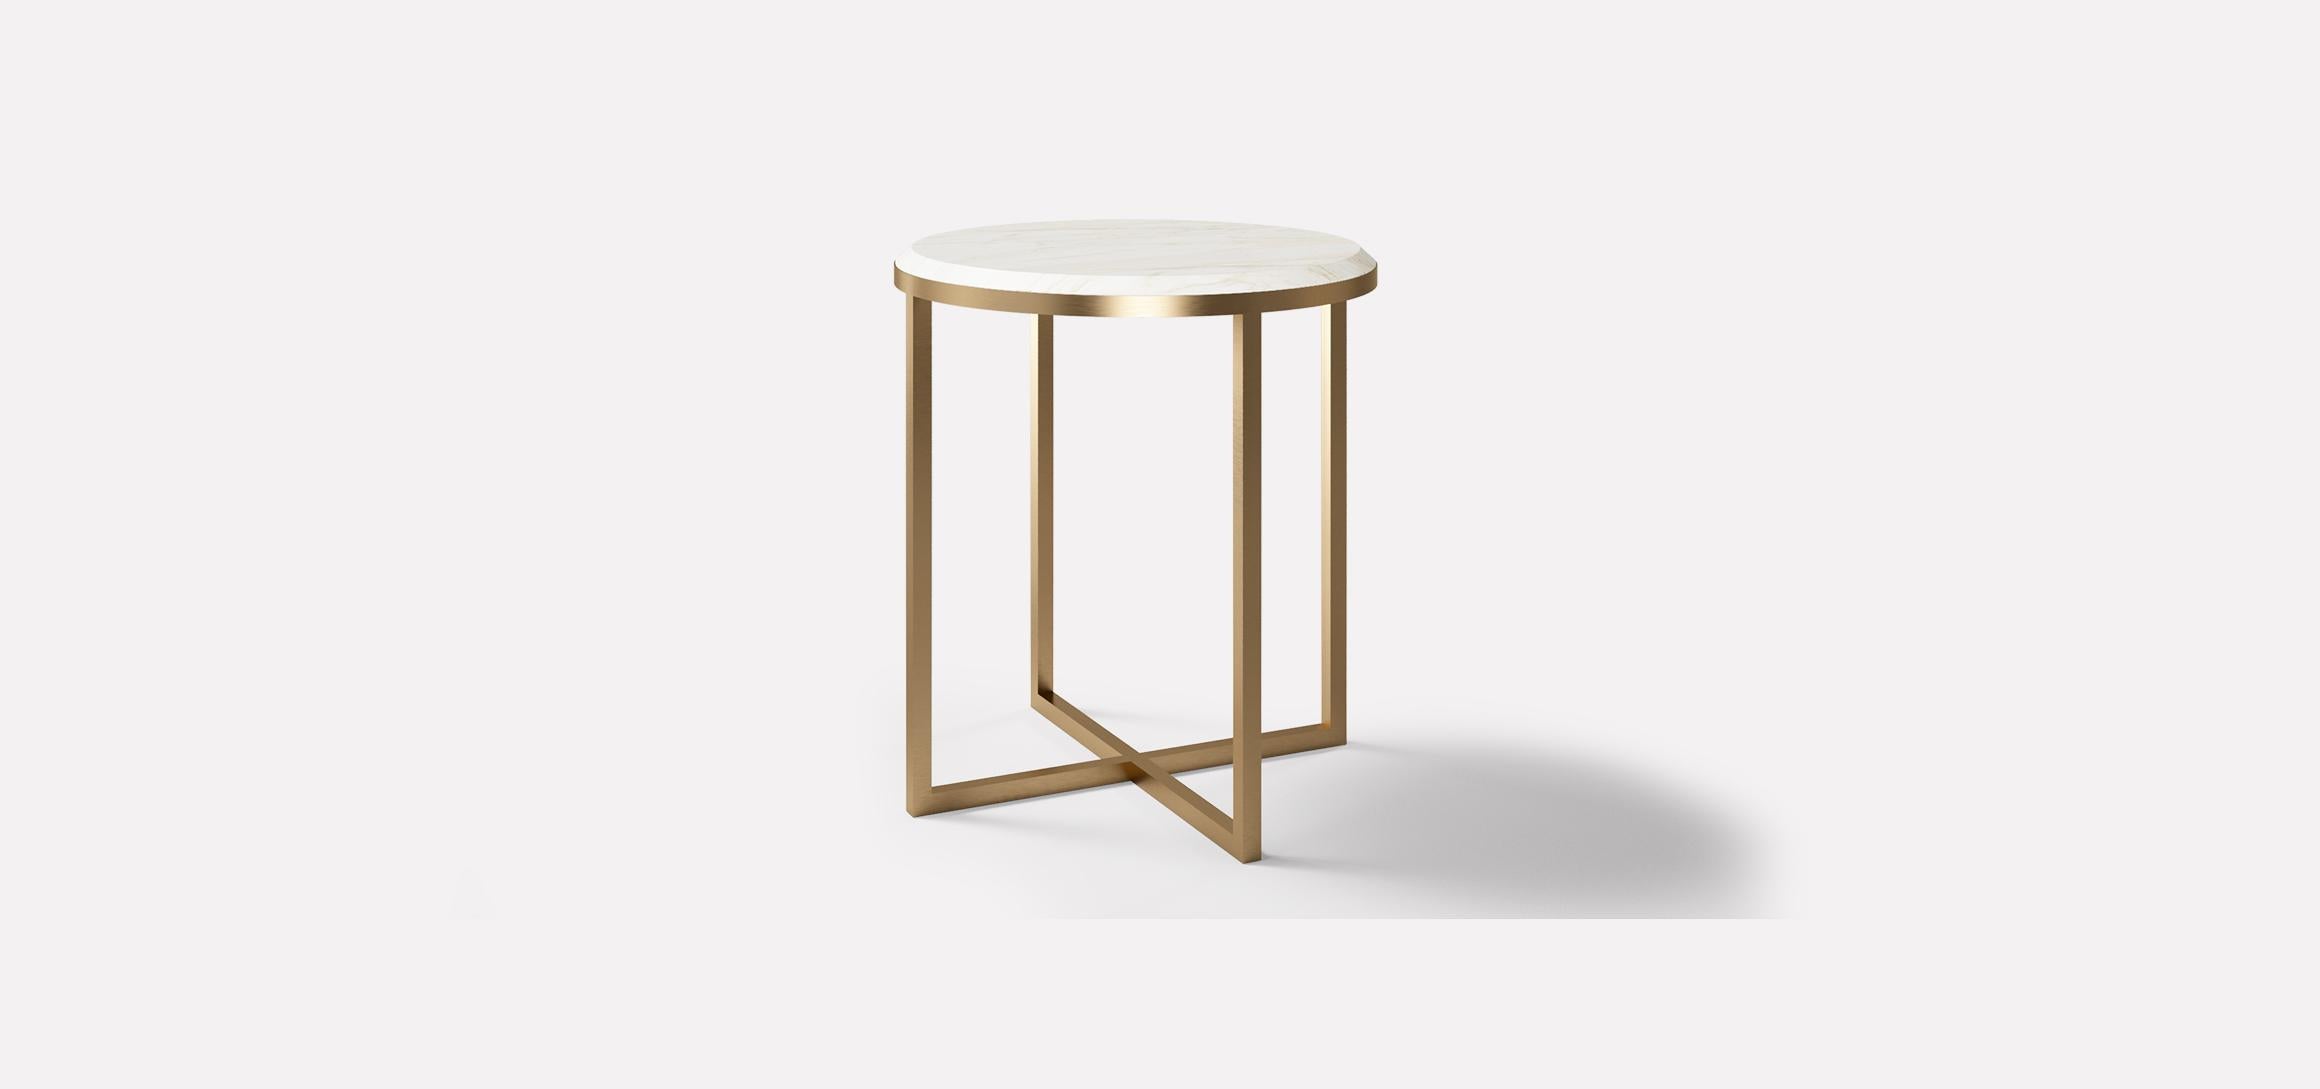 HOPE Royal is a side table with a round-shaped top and crossed straight metal base seamlessly welded and finished. The top is a precious marble perfectly beveled and carved, letting the beauty of material being the design protagonist of this